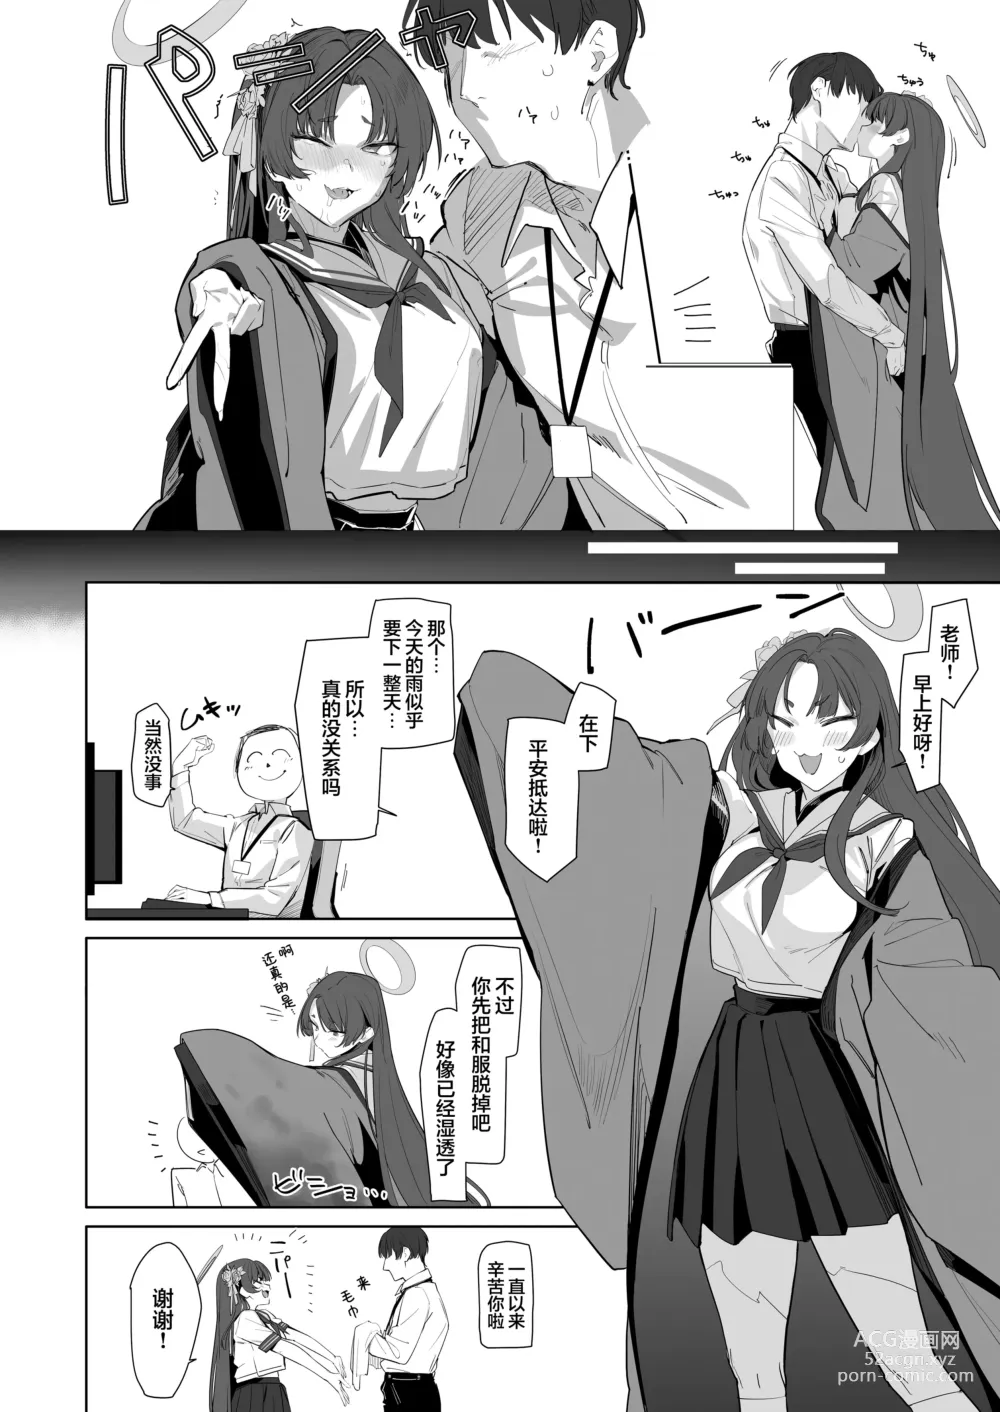 Page 4 of doujinshi 今日也请多多指导在下